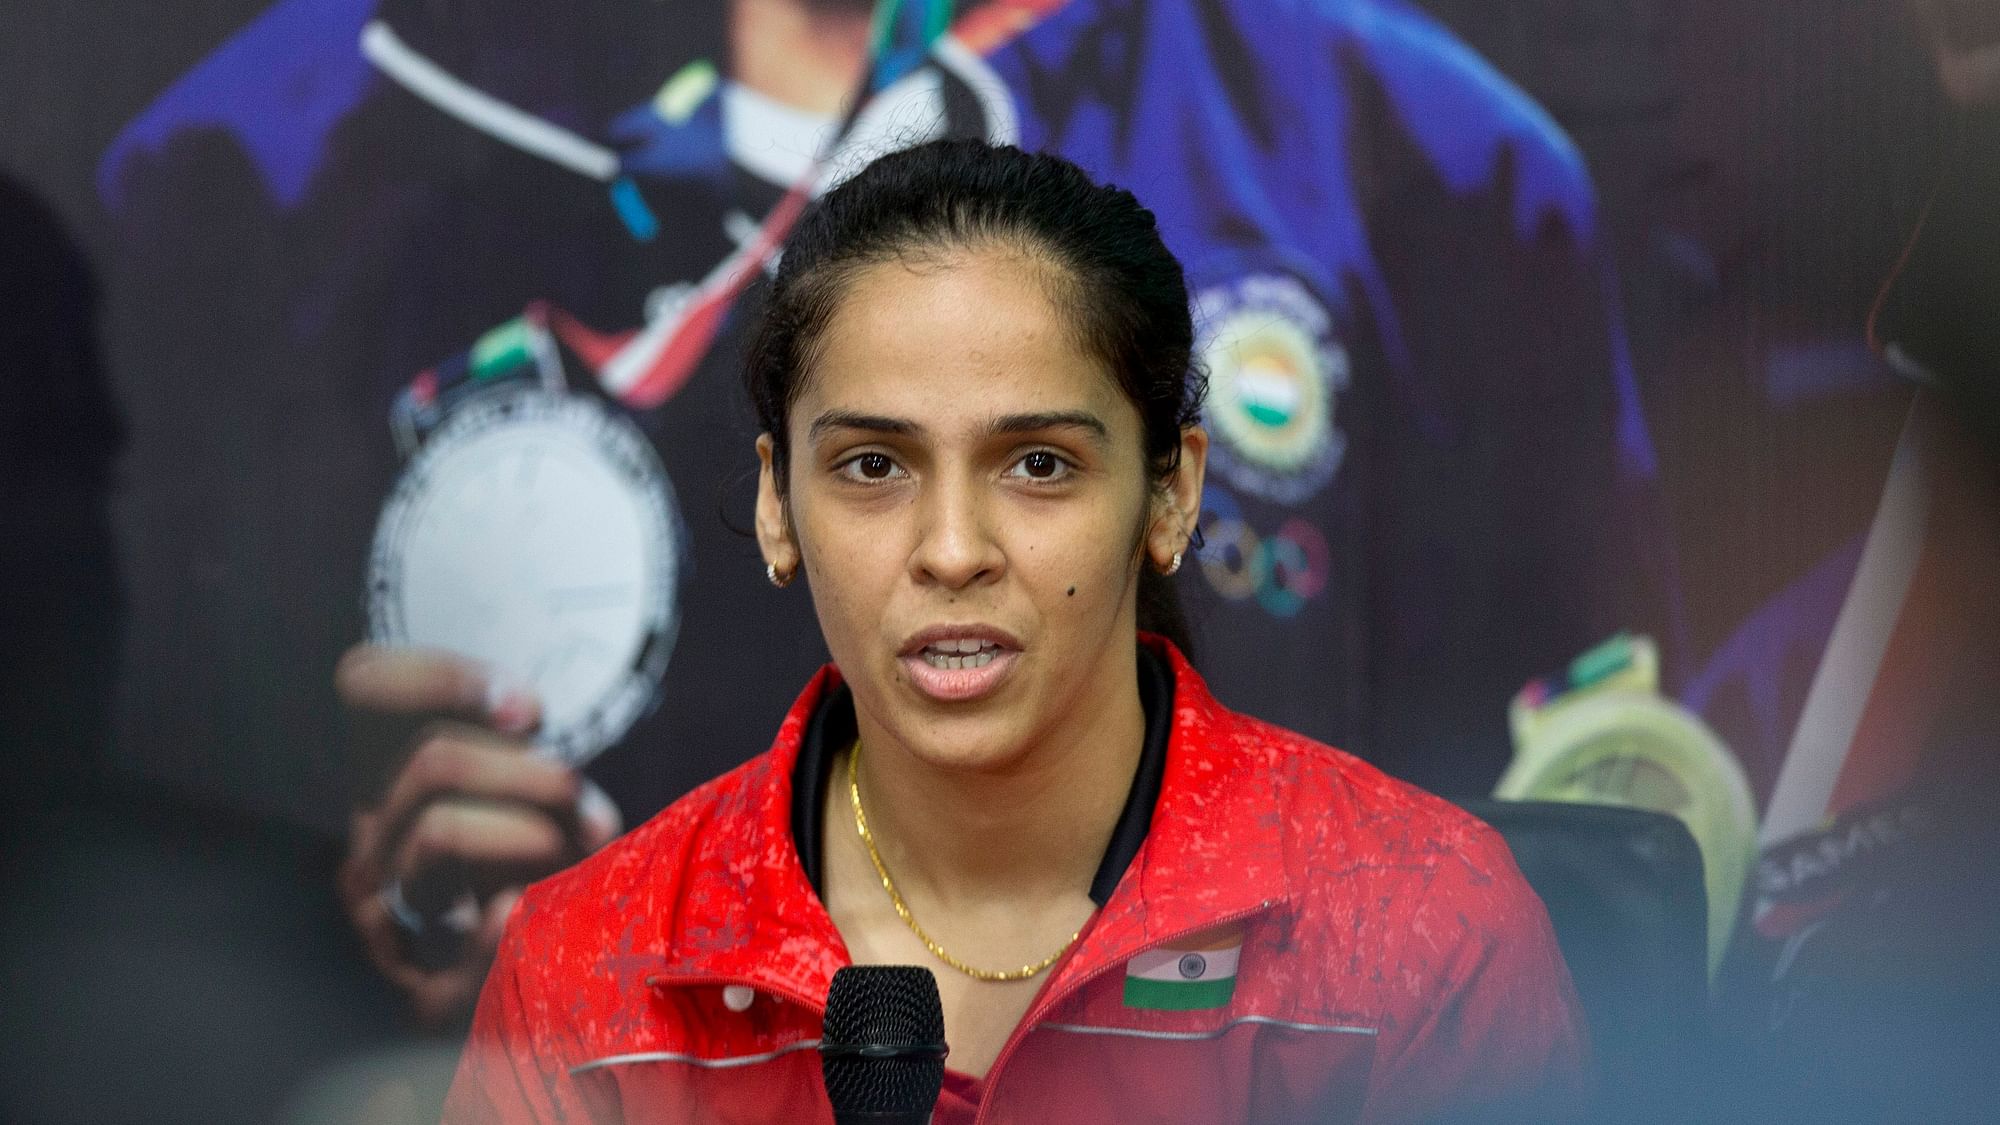 Saina Nehwal lost in the opening round of the All England Championships.